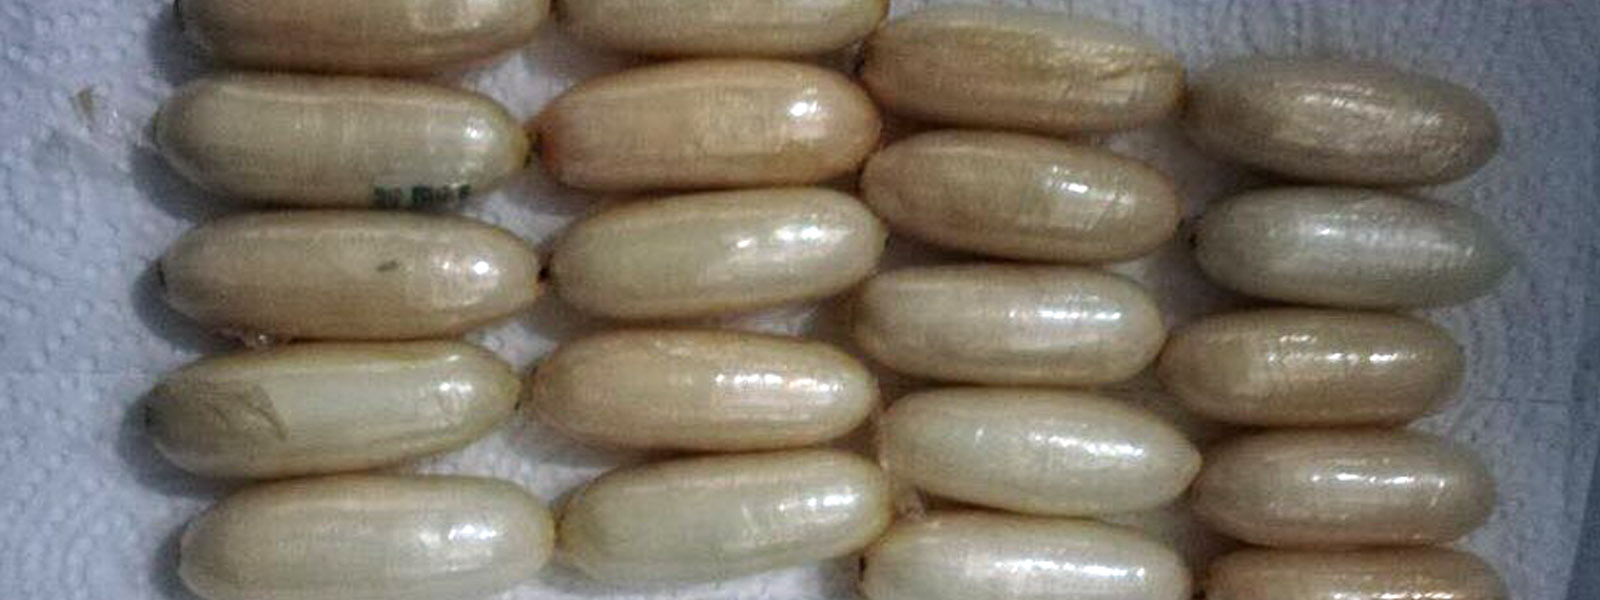 BIA passenger arrested over 'capsules'